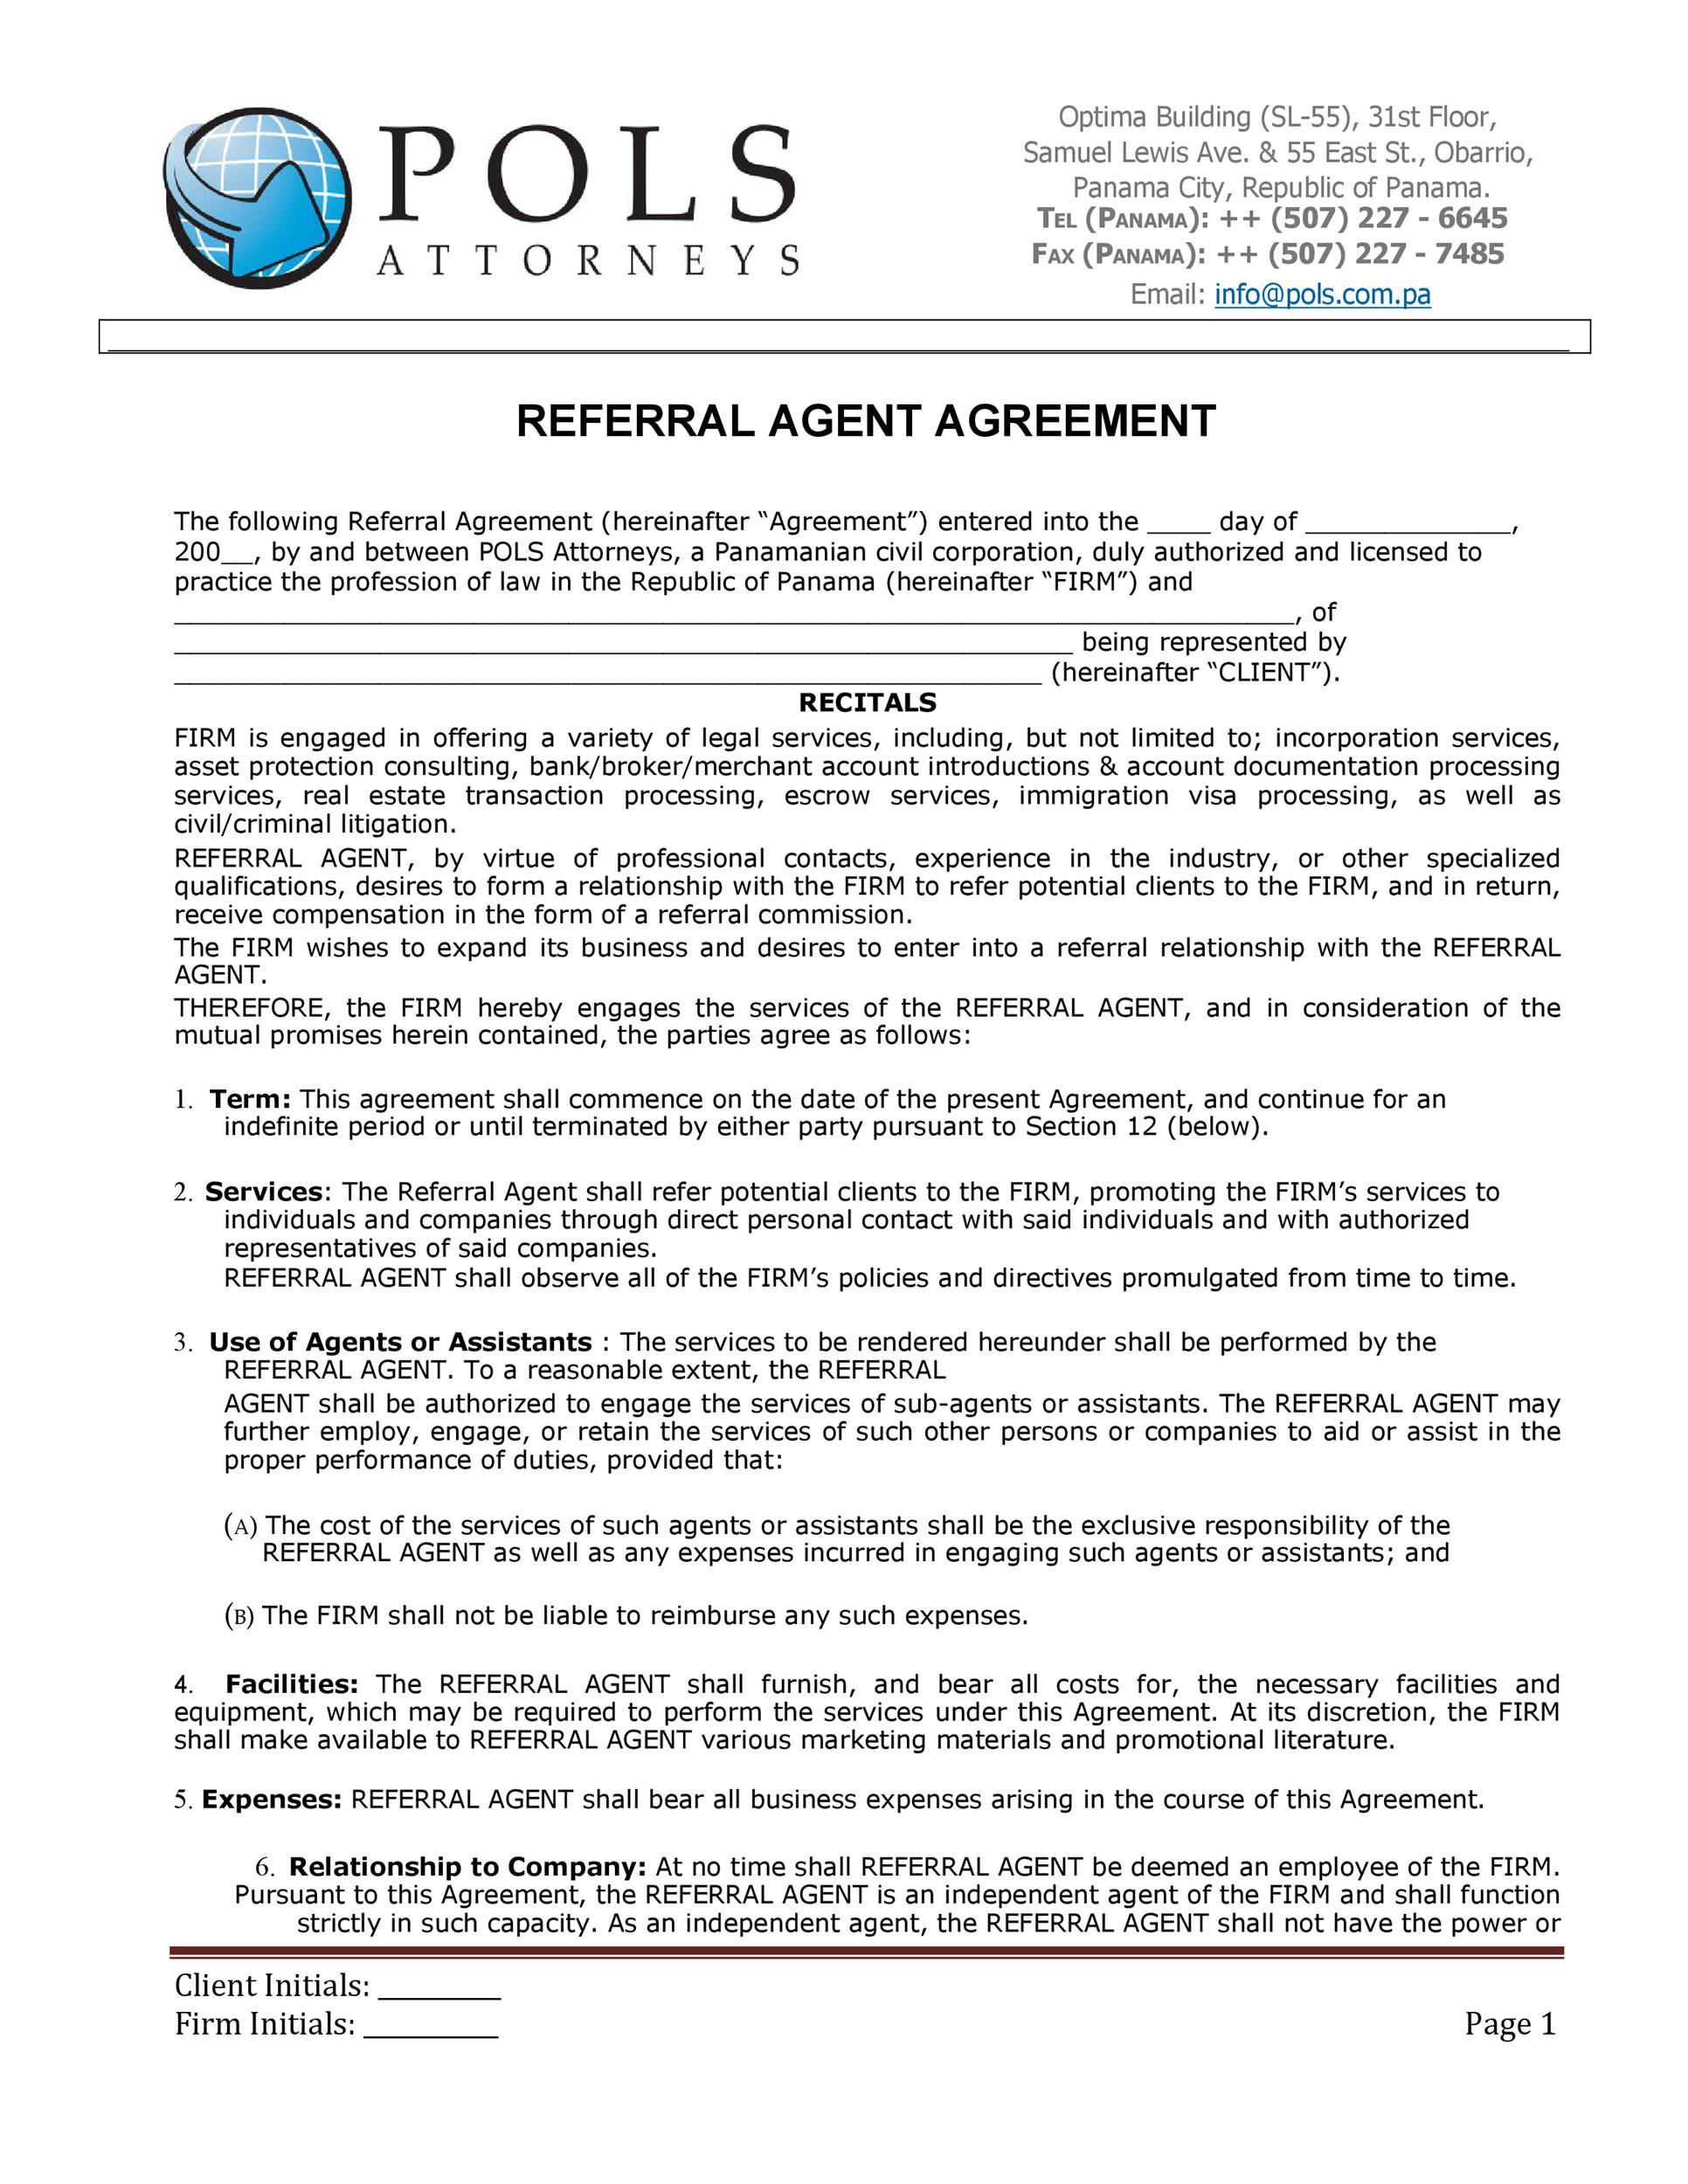 Free referral agreement template 29